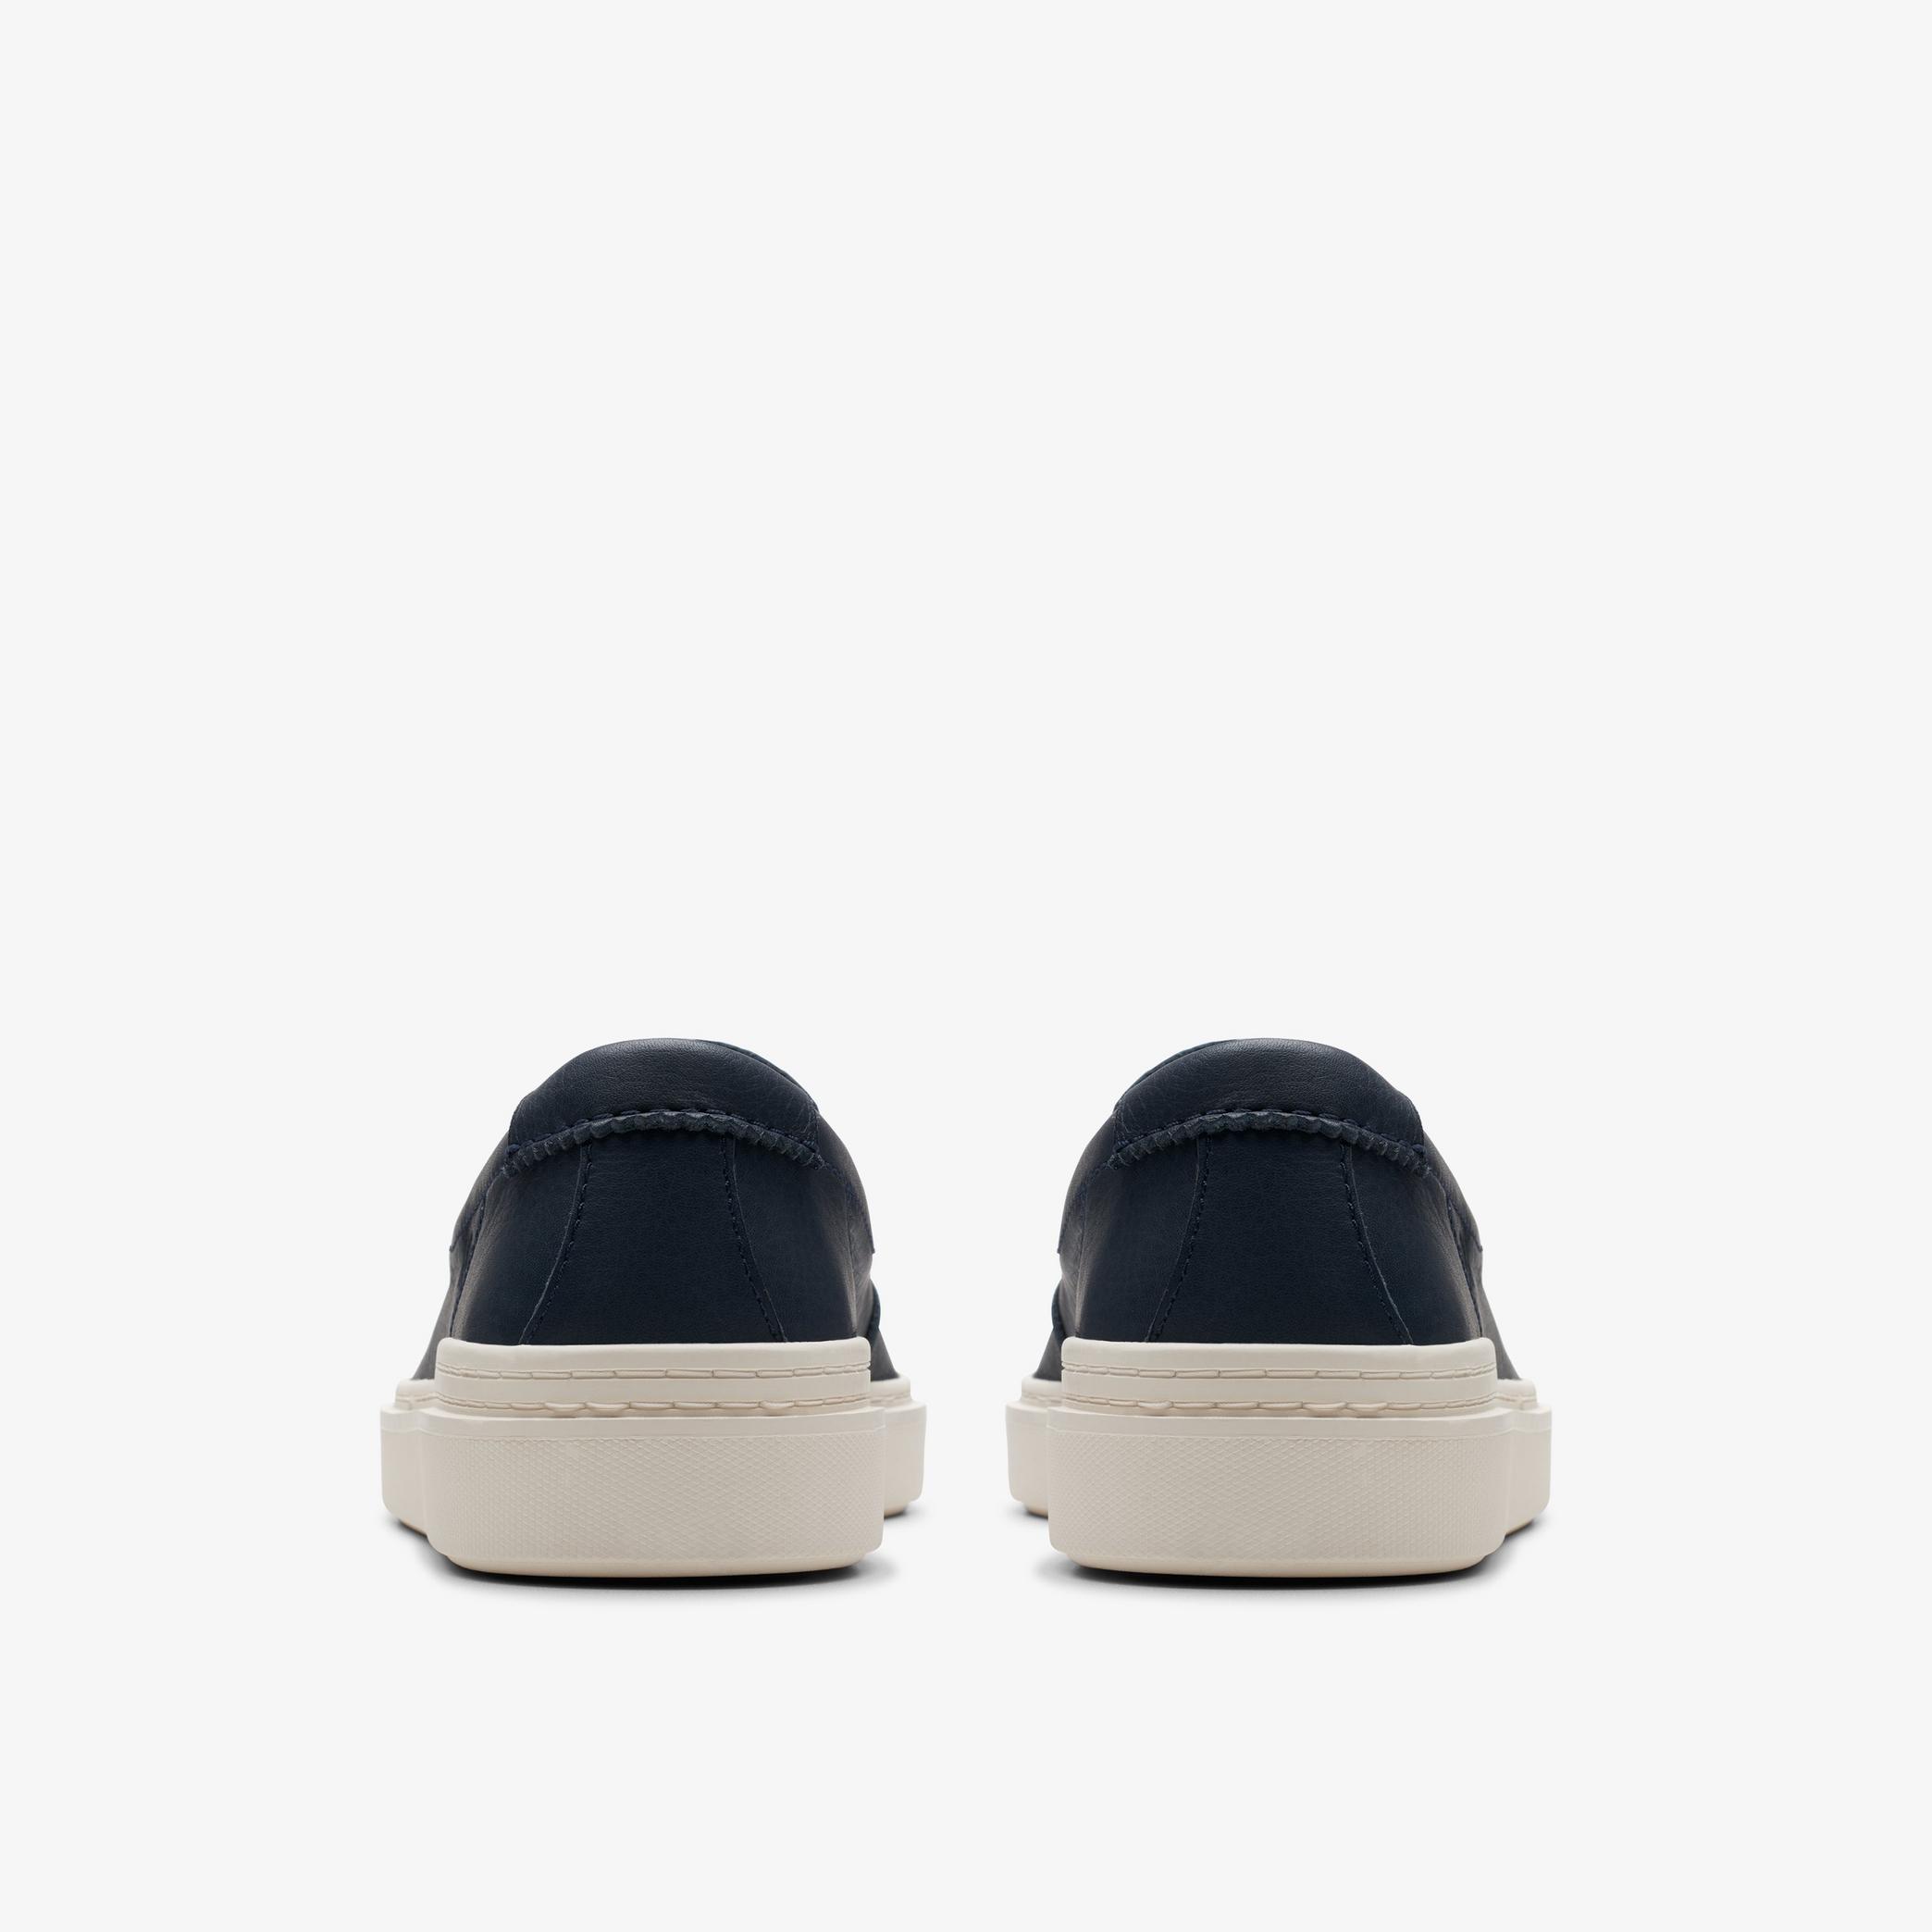 CRAFT SWIFT GO Navy Leather Slip Ons, view 5 of 6